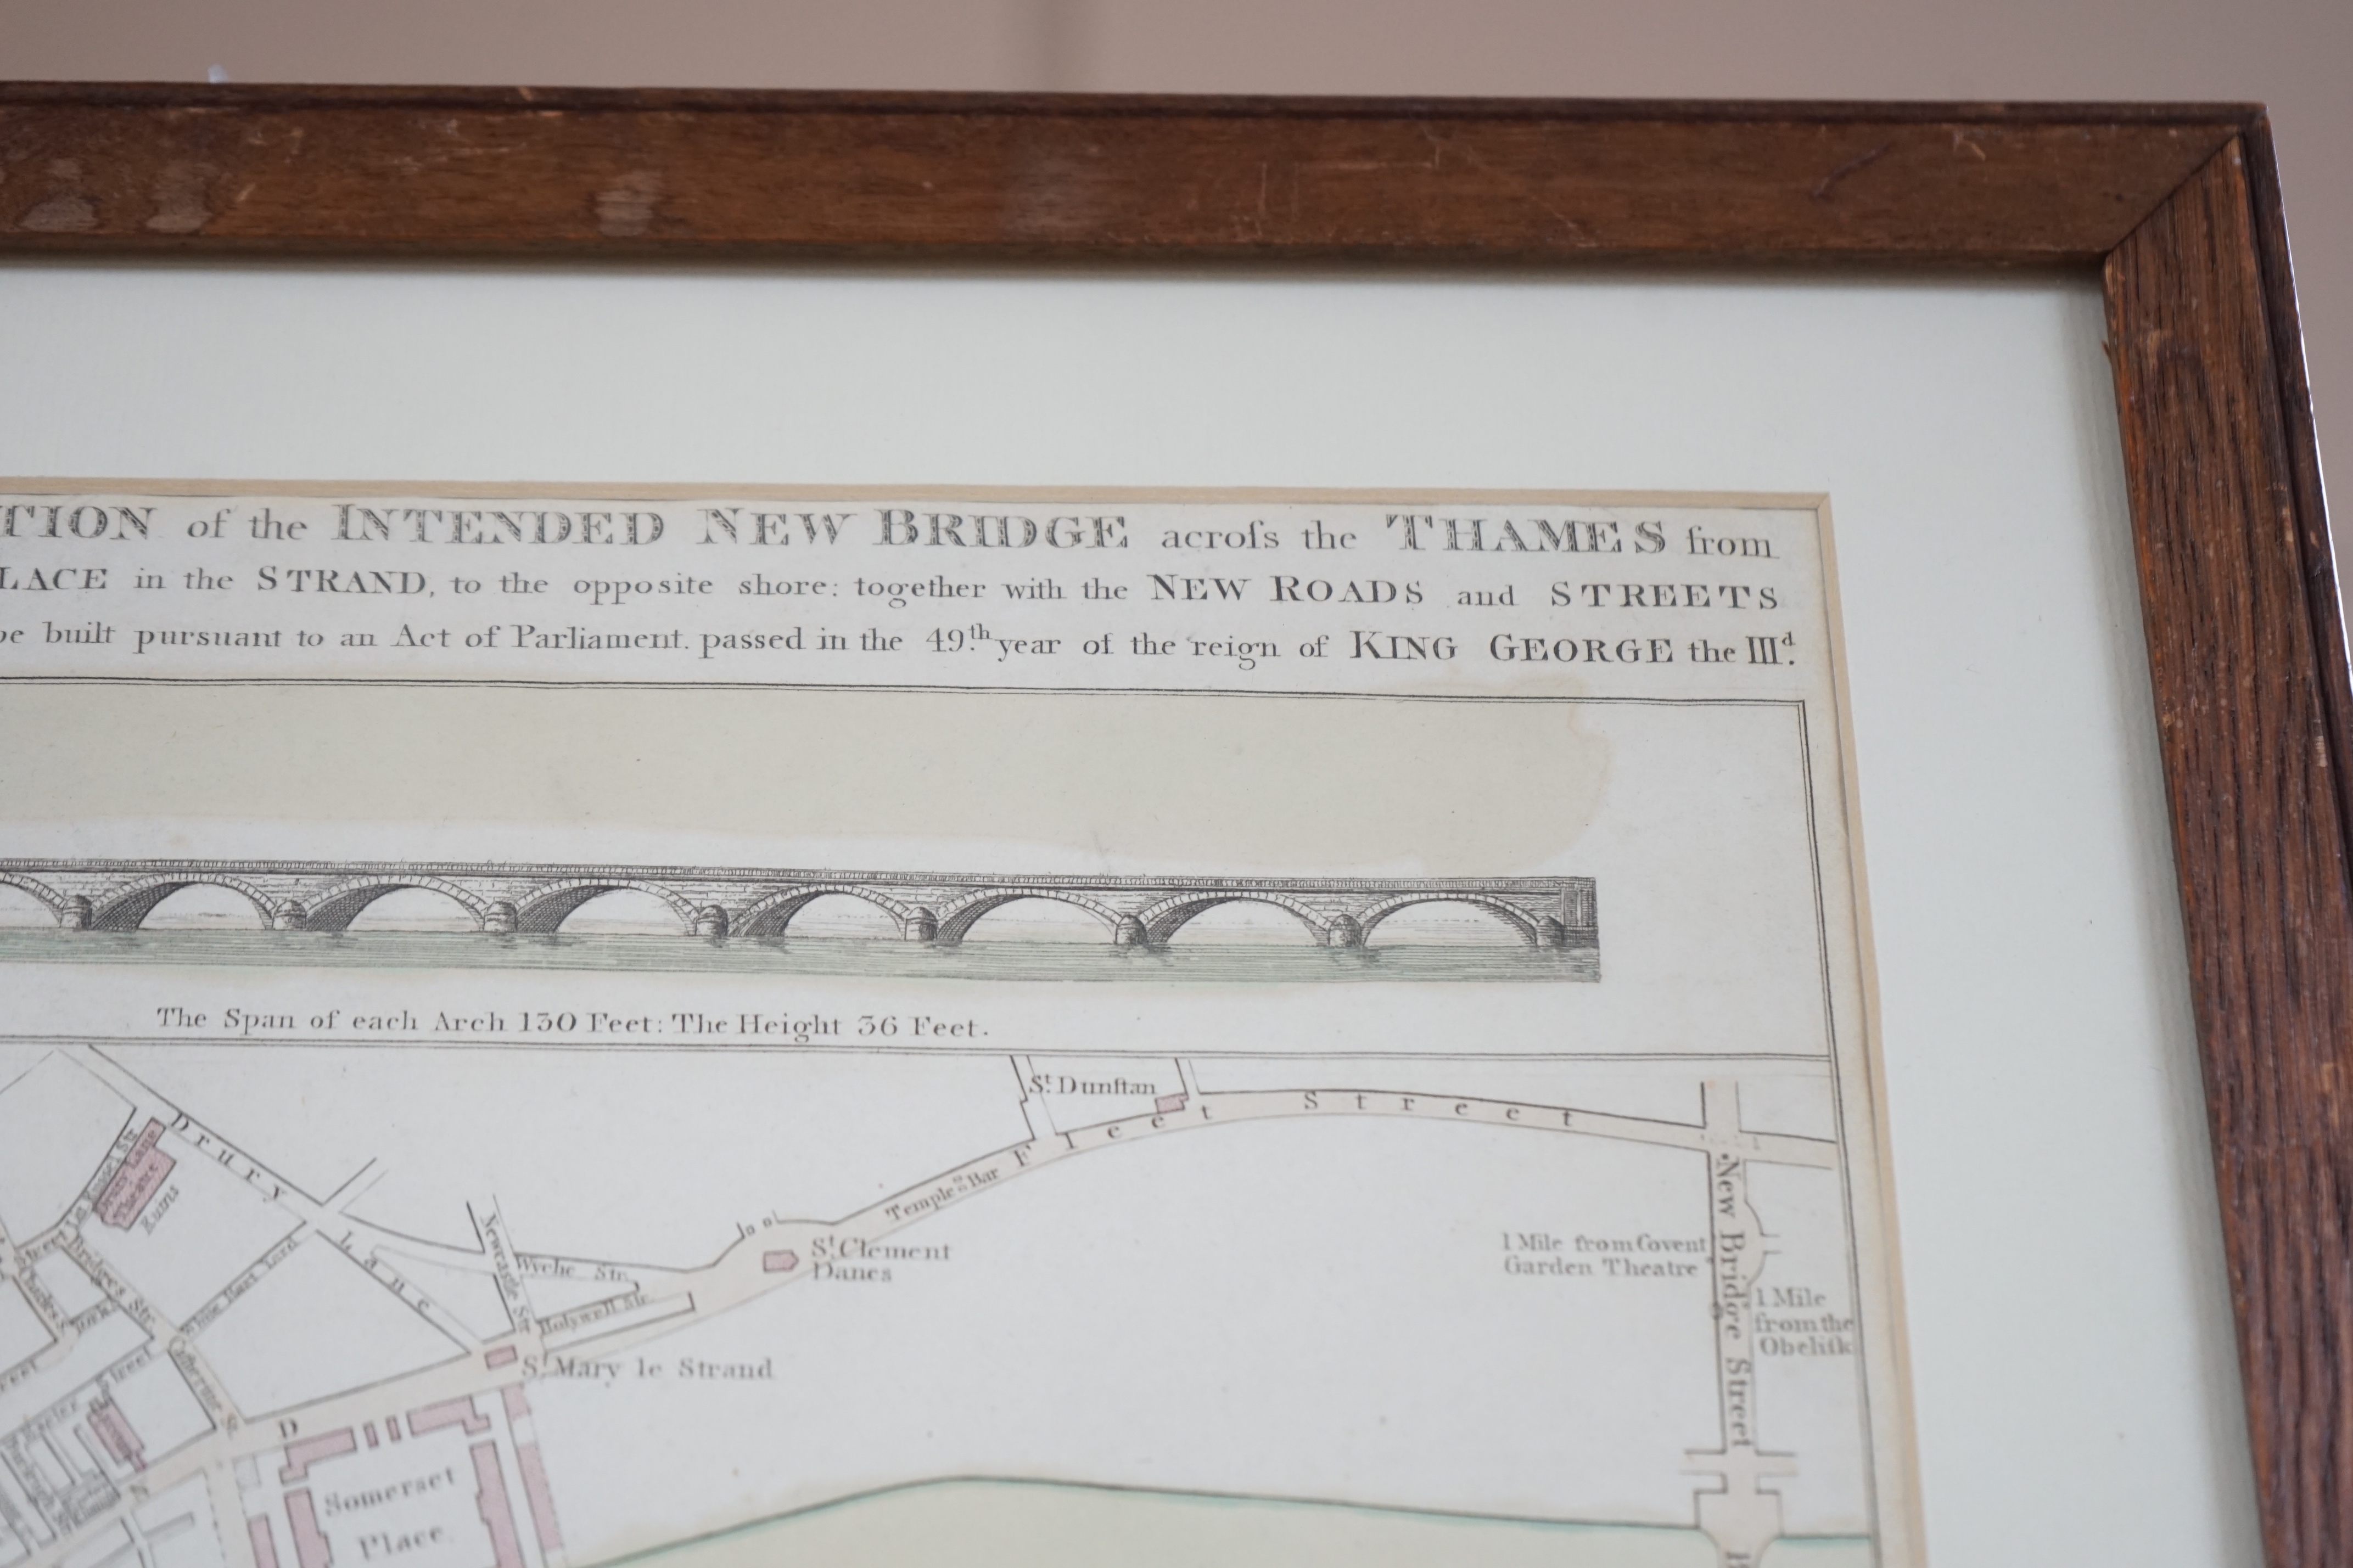 A 19th century engraving, Plan and Elevation of the intended new bridge across The Thames, an Act of Parliament passed in the 49th year of King George III, publ. by L. Luffman, 377 Strand, London, 35 x 28cm